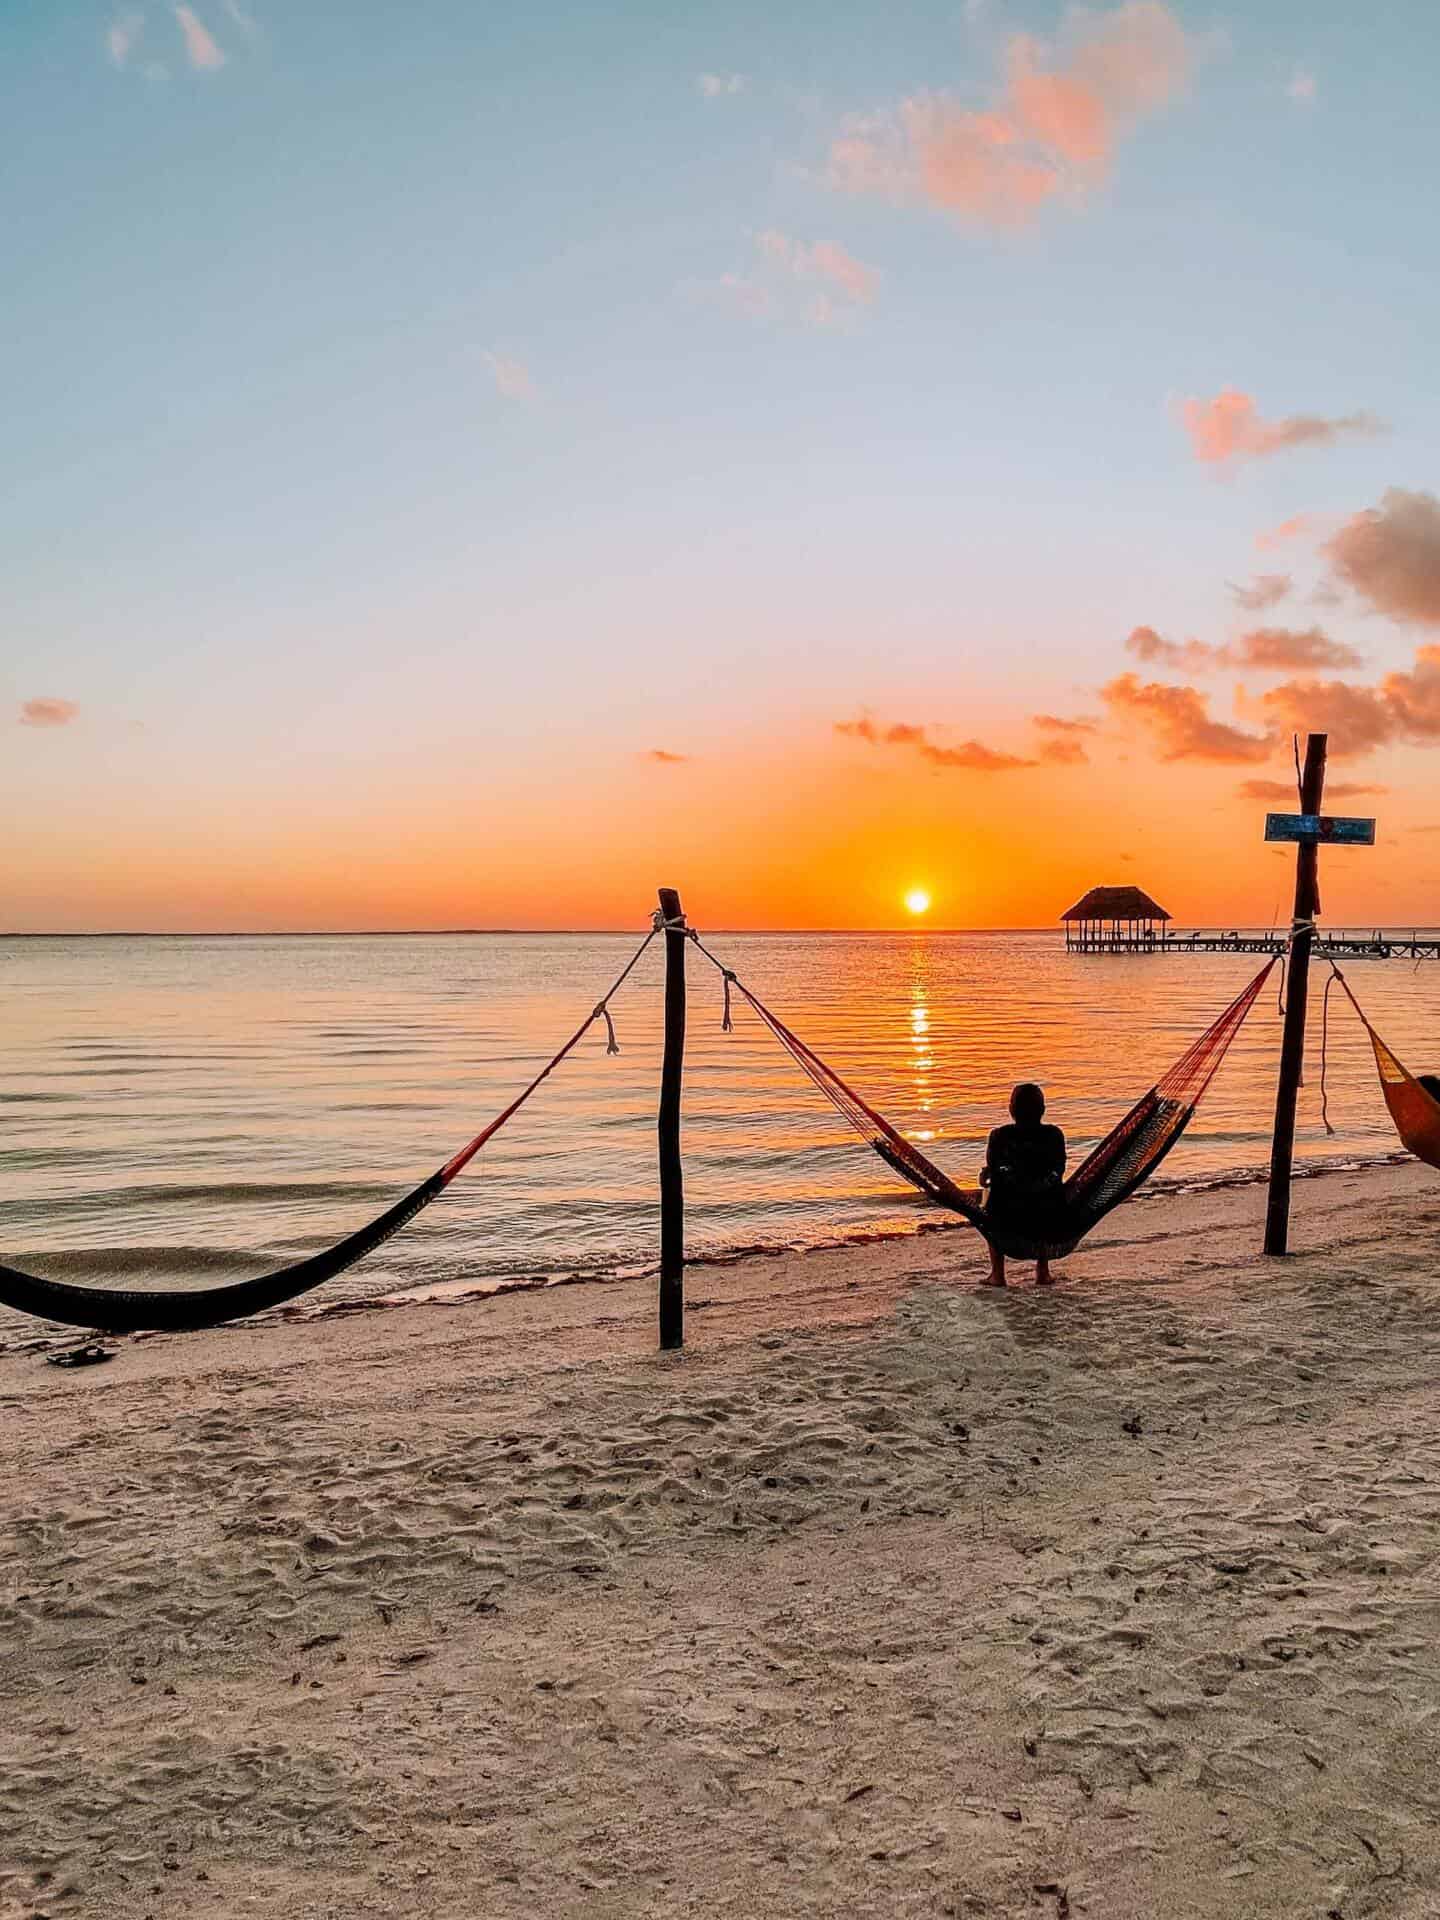 Best Instagram spots of the most beautiful places in Holbox island in Mexico